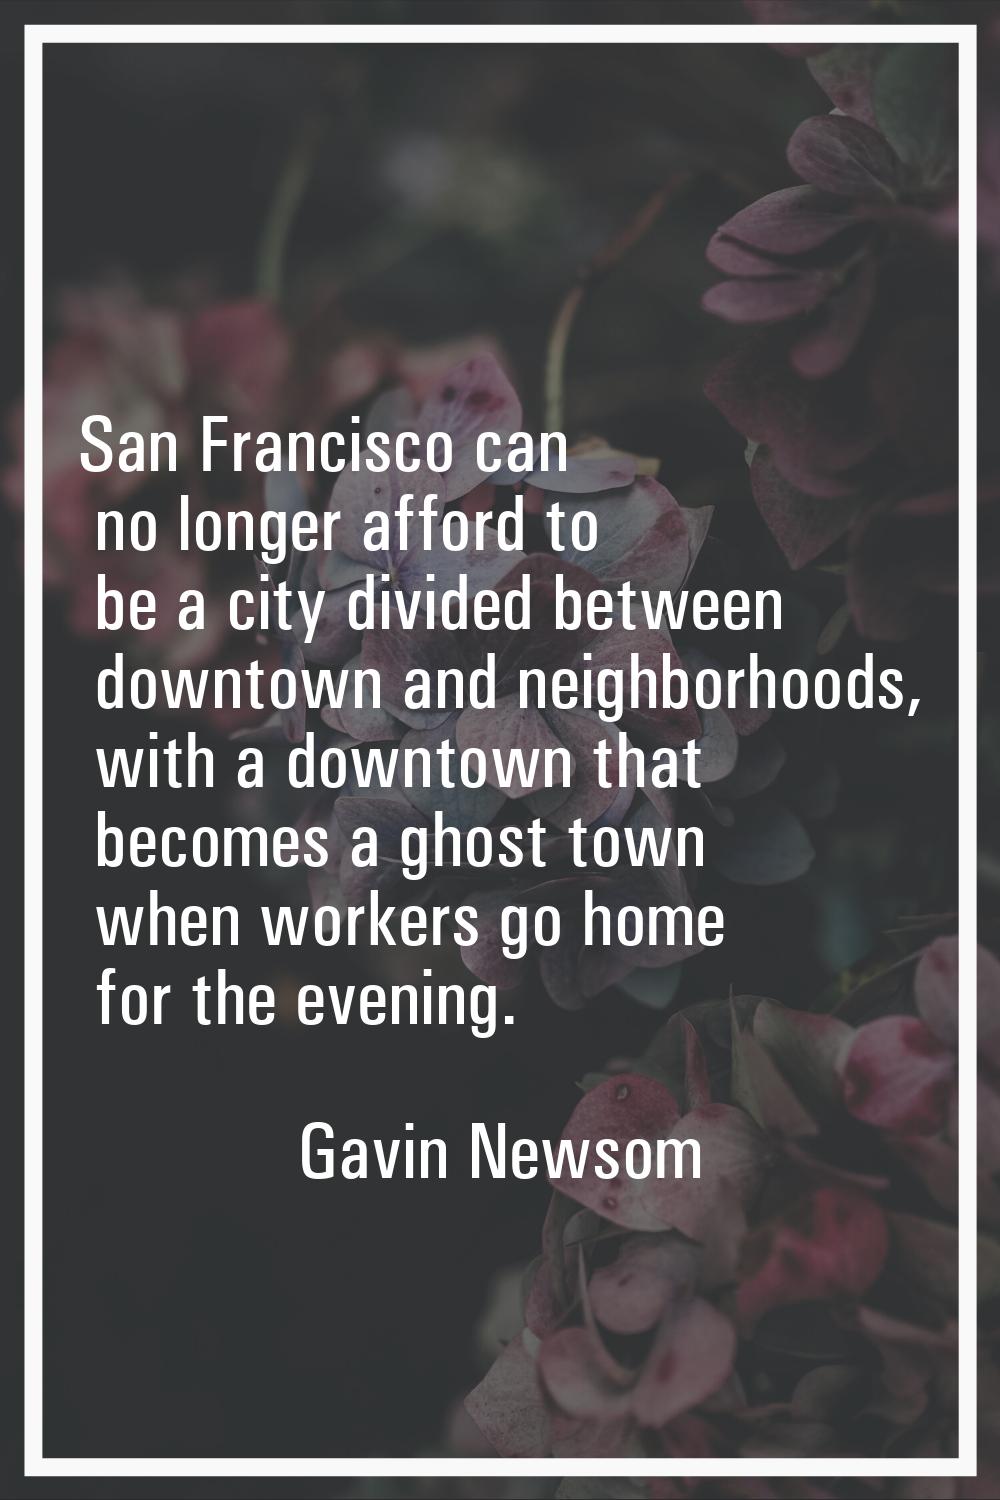 San Francisco can no longer afford to be a city divided between downtown and neighborhoods, with a 